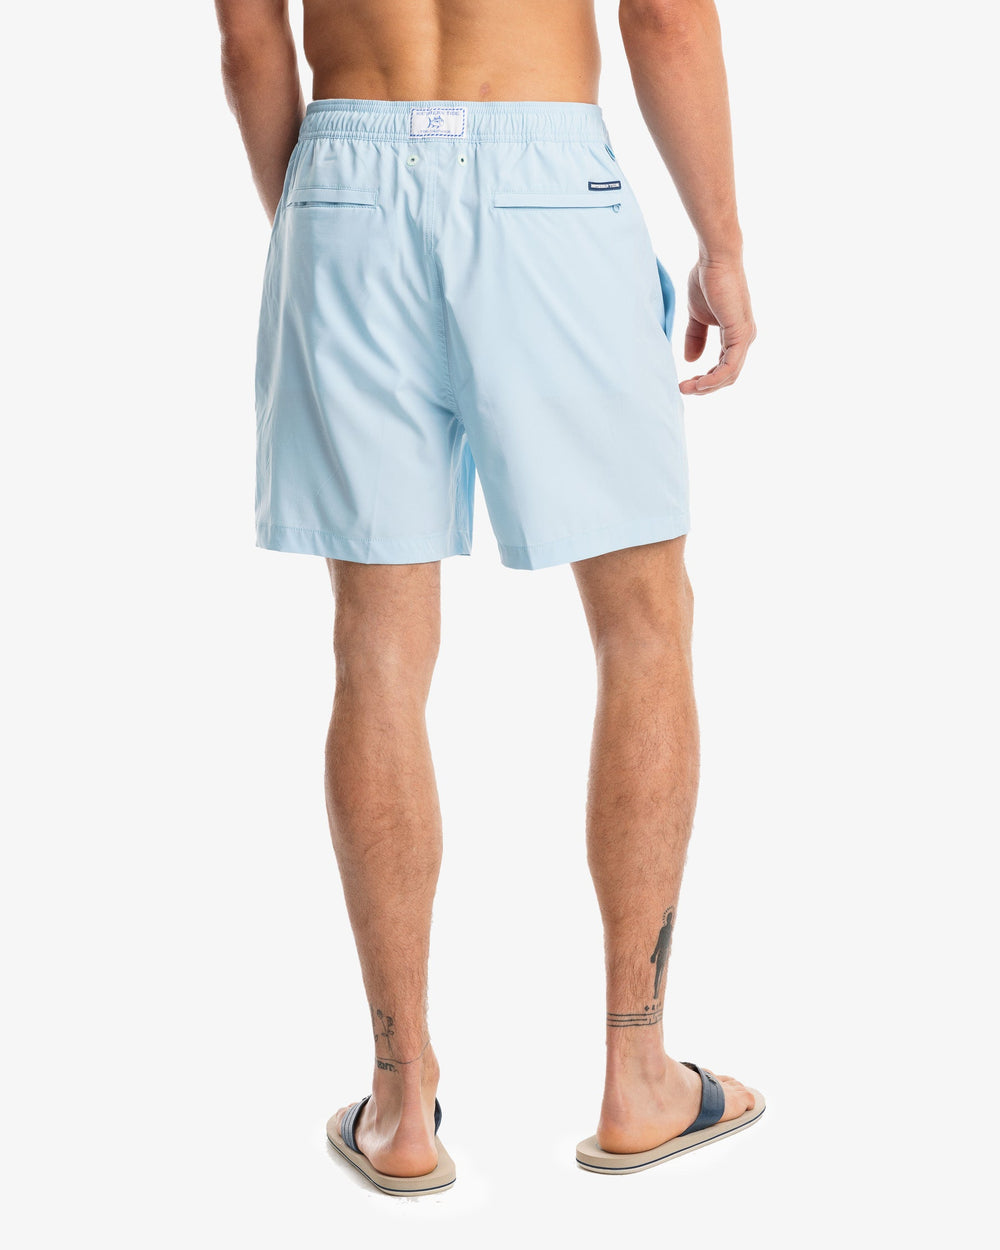 The model back view of the Men's Solid Swim Trunk by Southern Tide - Aquamarine